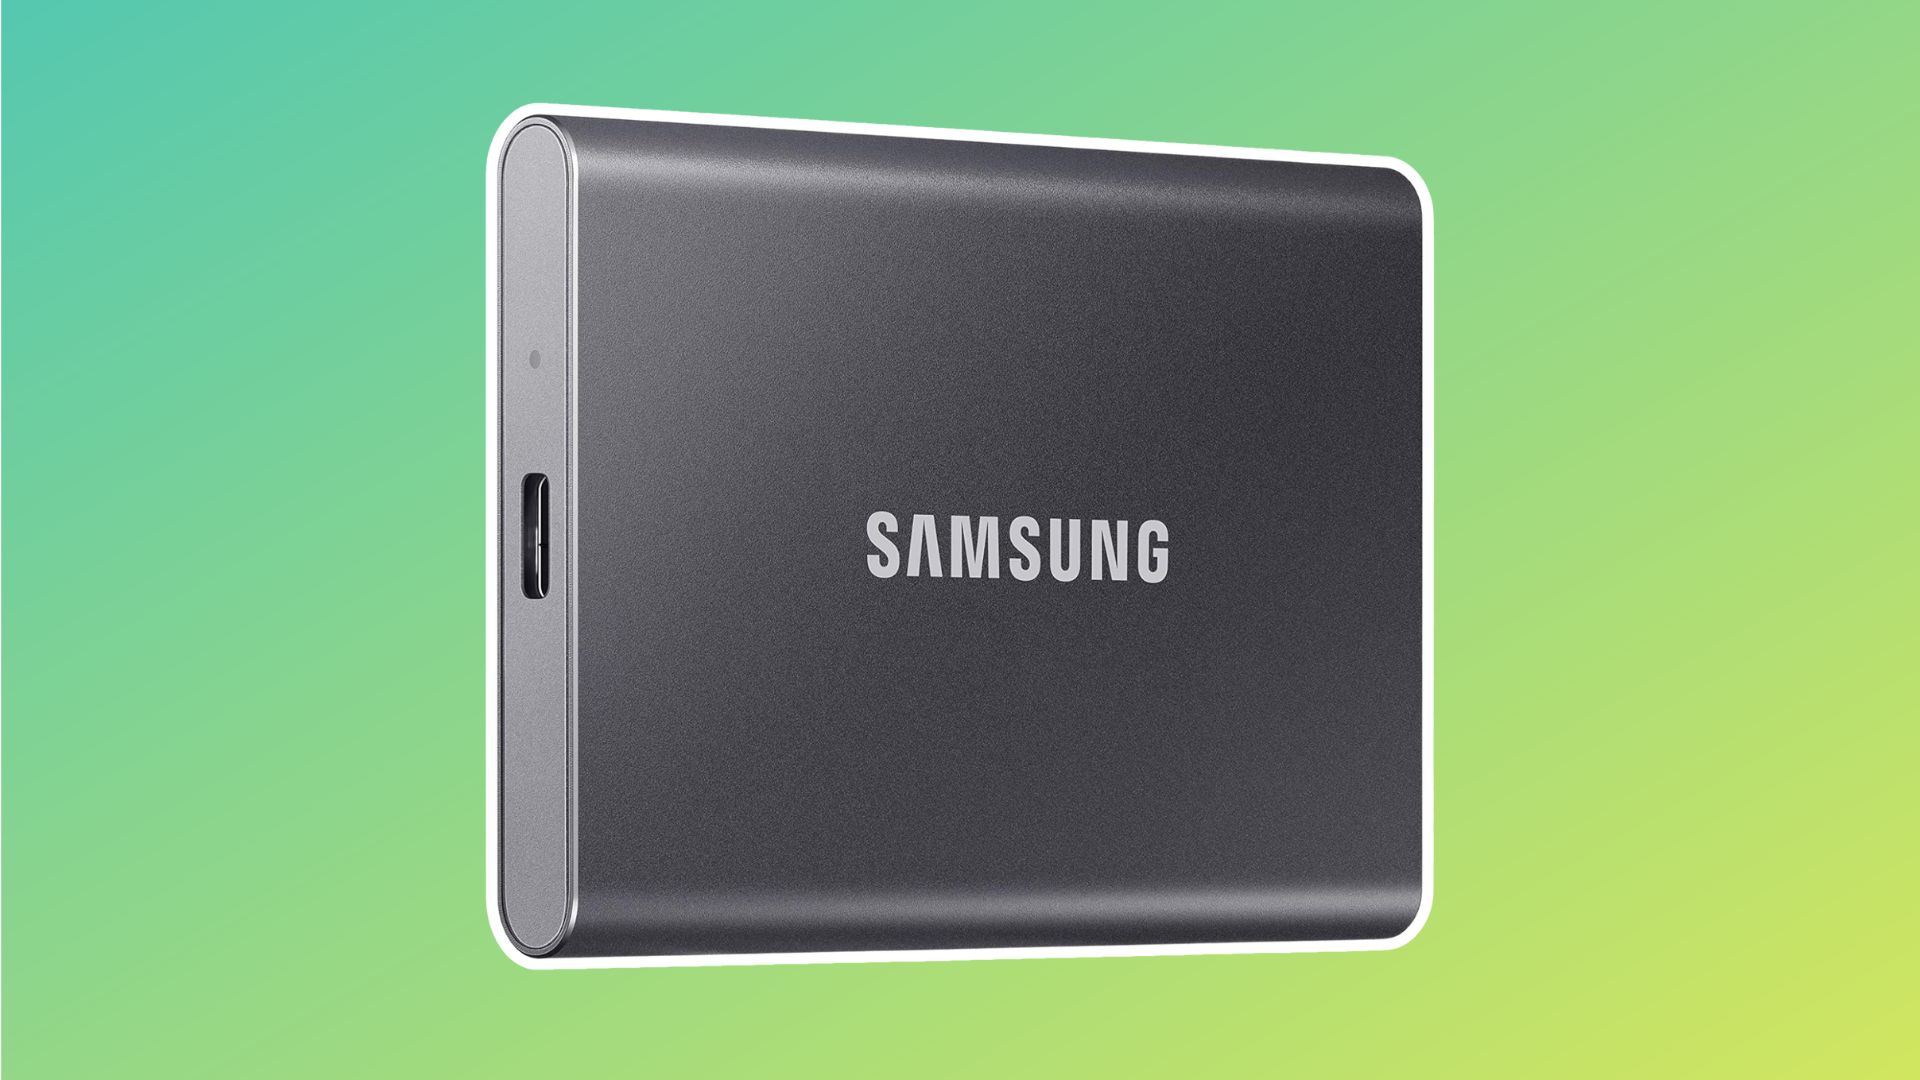 Don't miss the chance to save $180 on this Samsung SSD